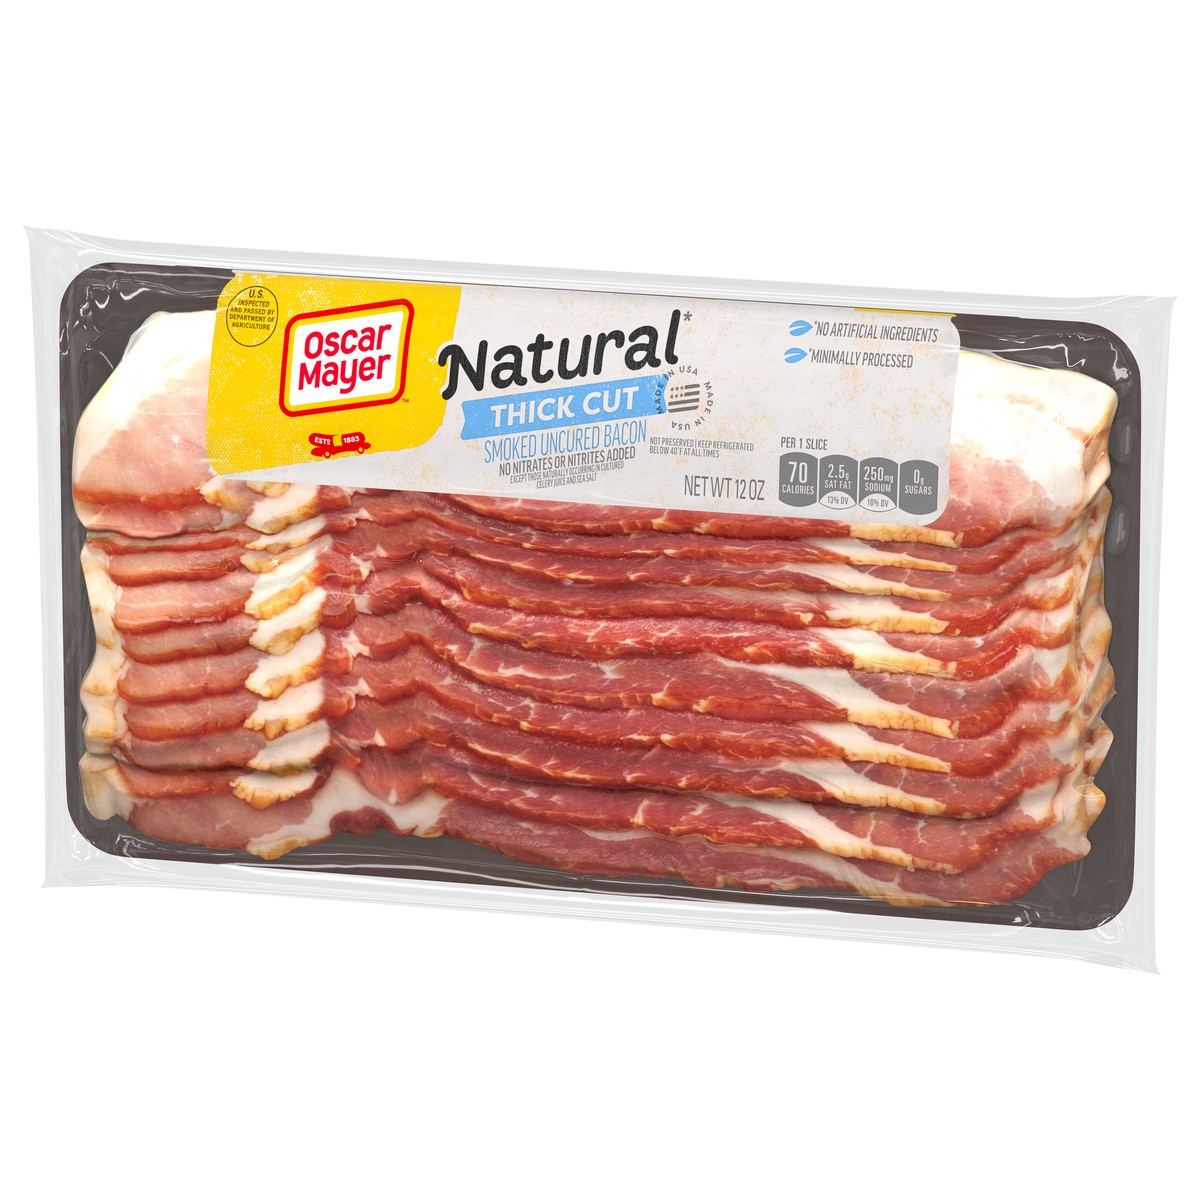 slide 2 of 9, Oscar Mayer Natural Thick Cut Smoked Uncured Bacon, 12 oz Pack, 8-10 slices, 12 oz